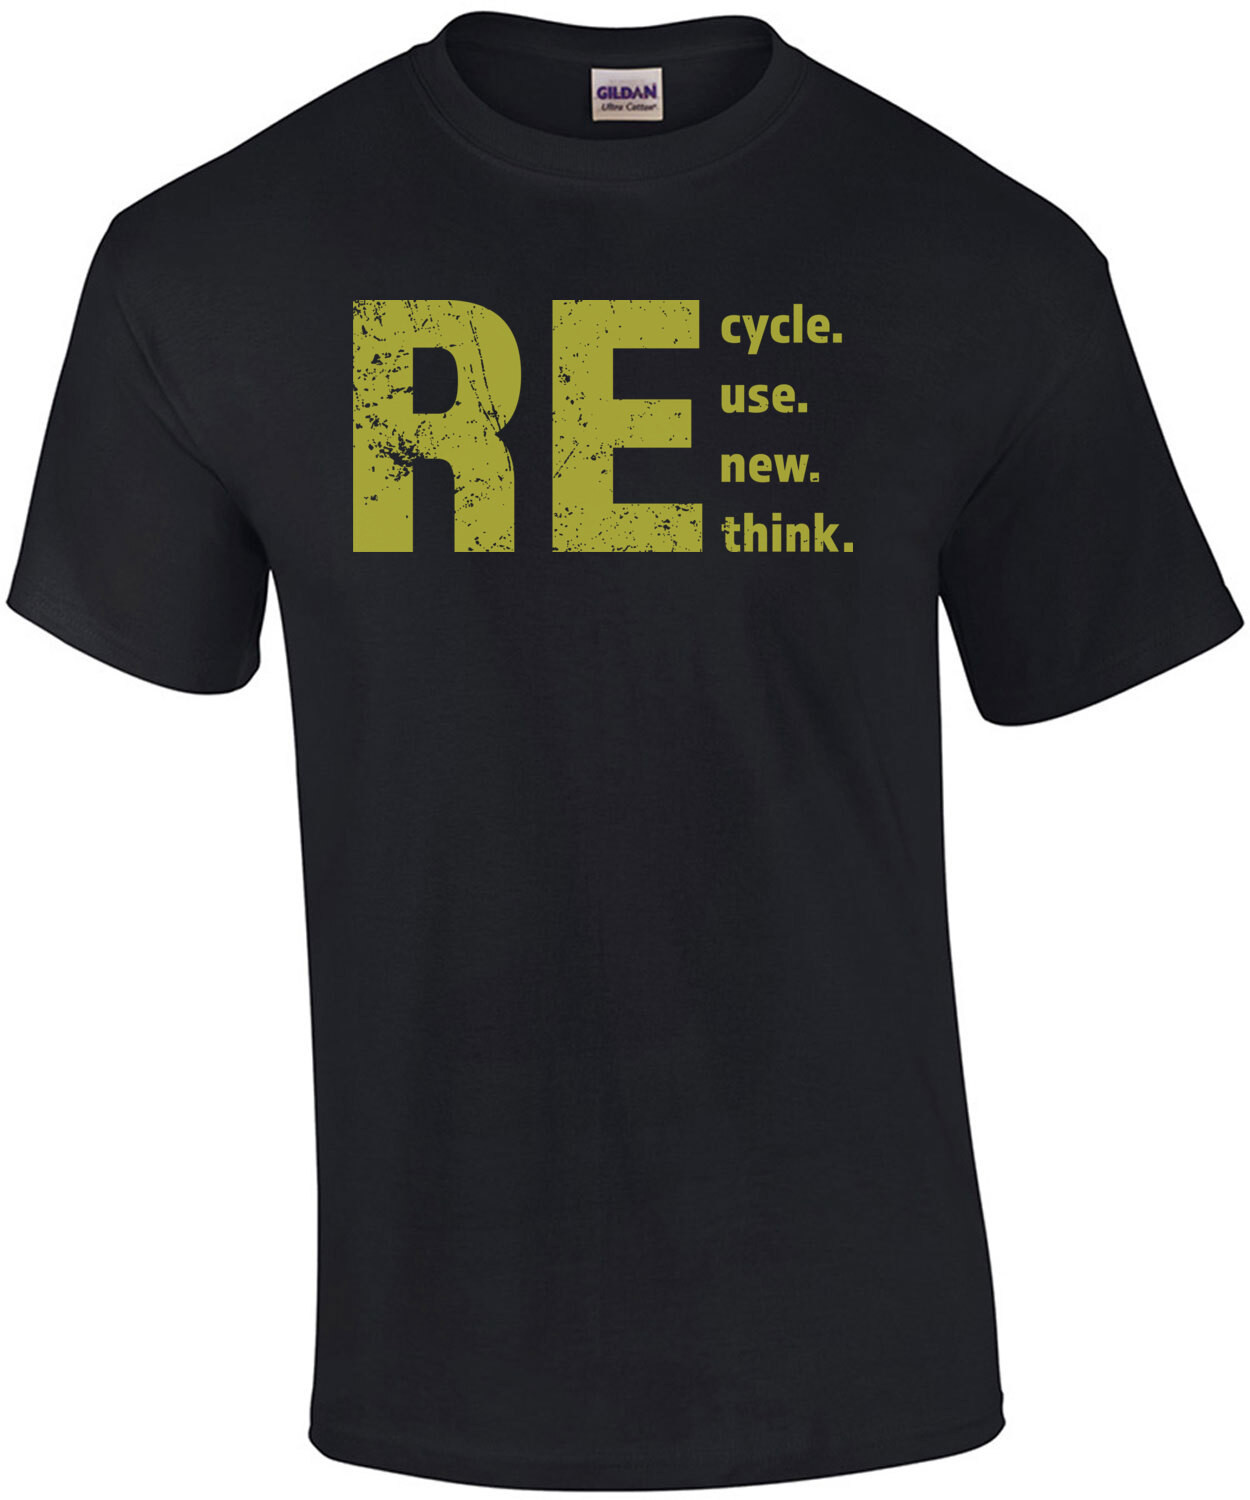 Recycle Reuse Renew Rethink Cunt Banned Walmart Shirt